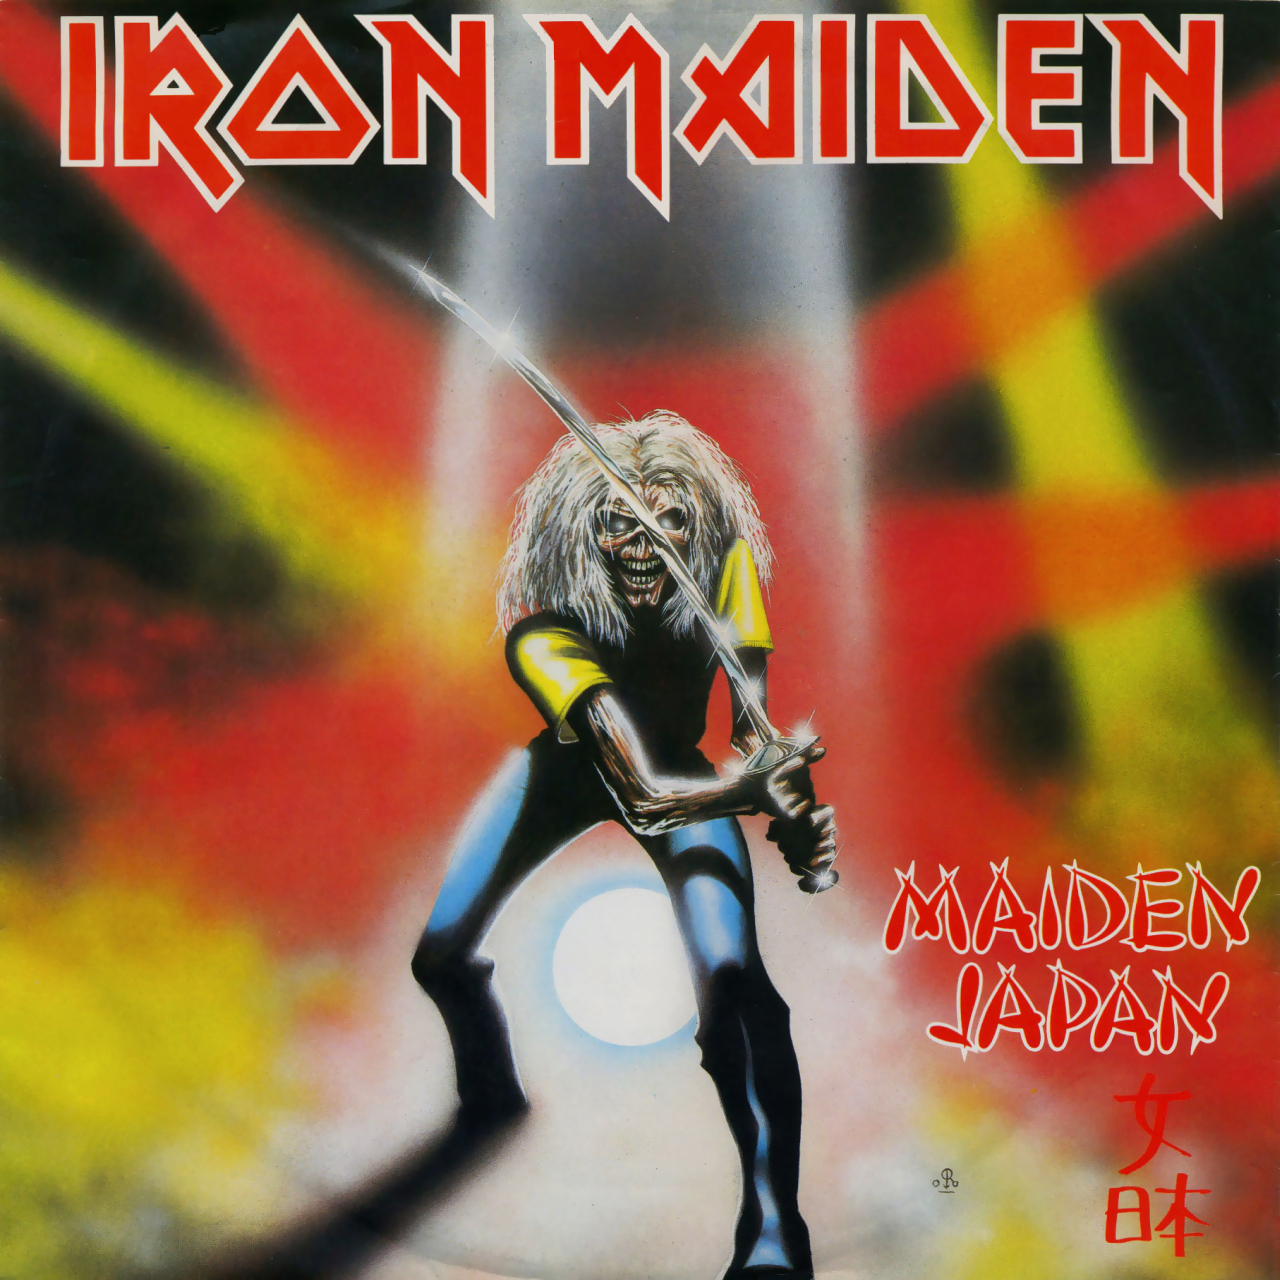 9. “Running Free (live)” from ‘Maiden Japan’ (1981)